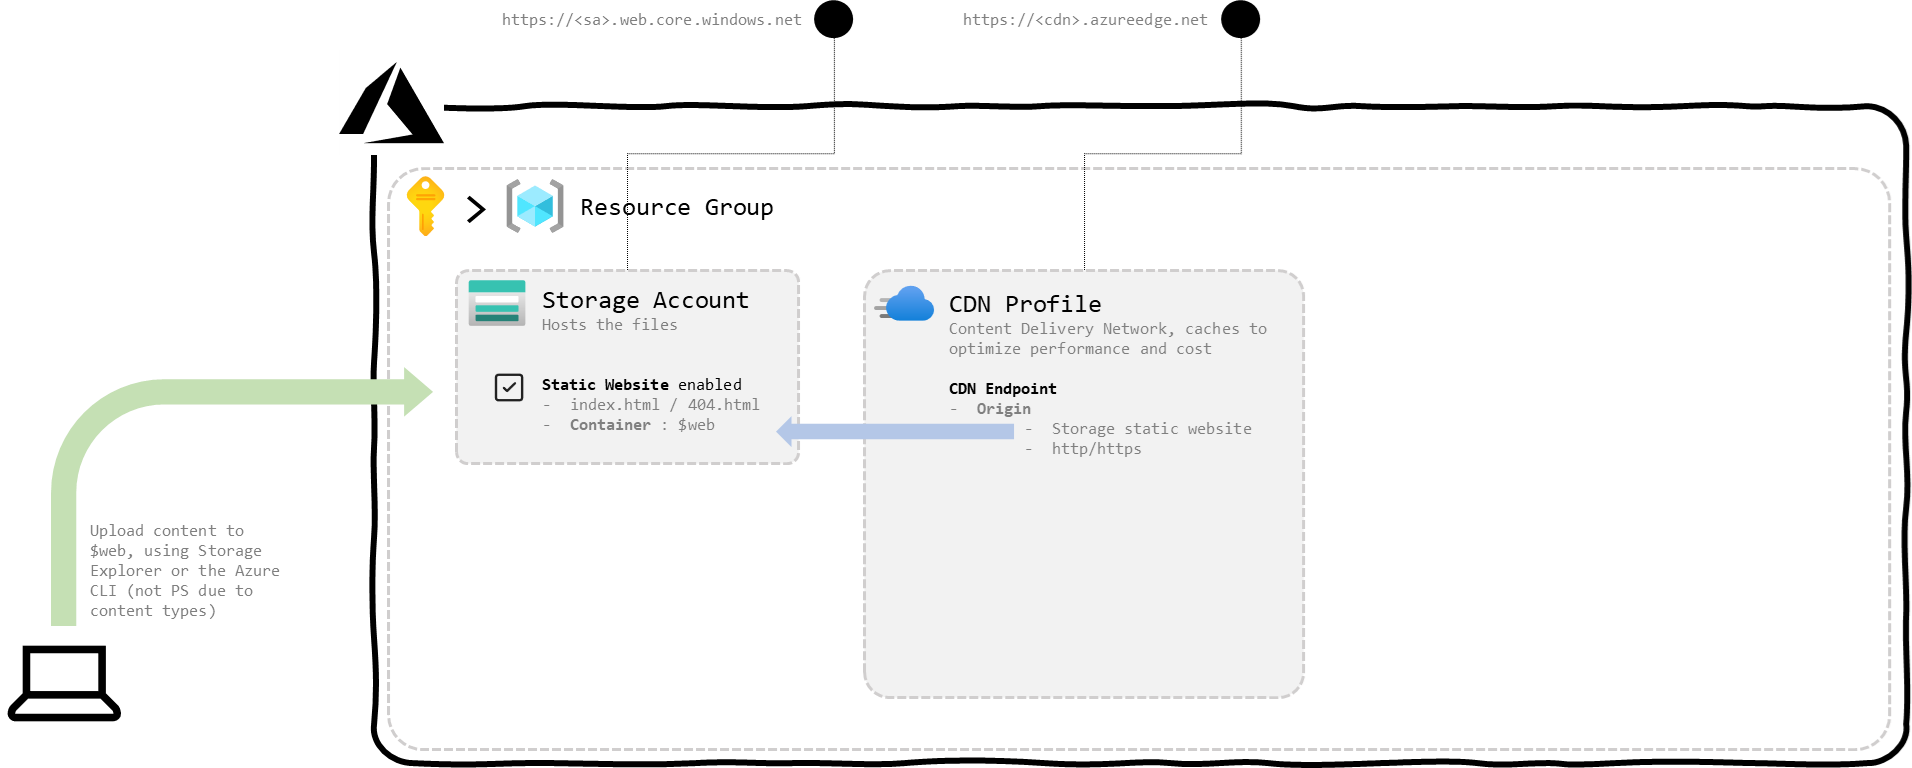 Step 1 : a storage account with static hosting and a CDN endpoint